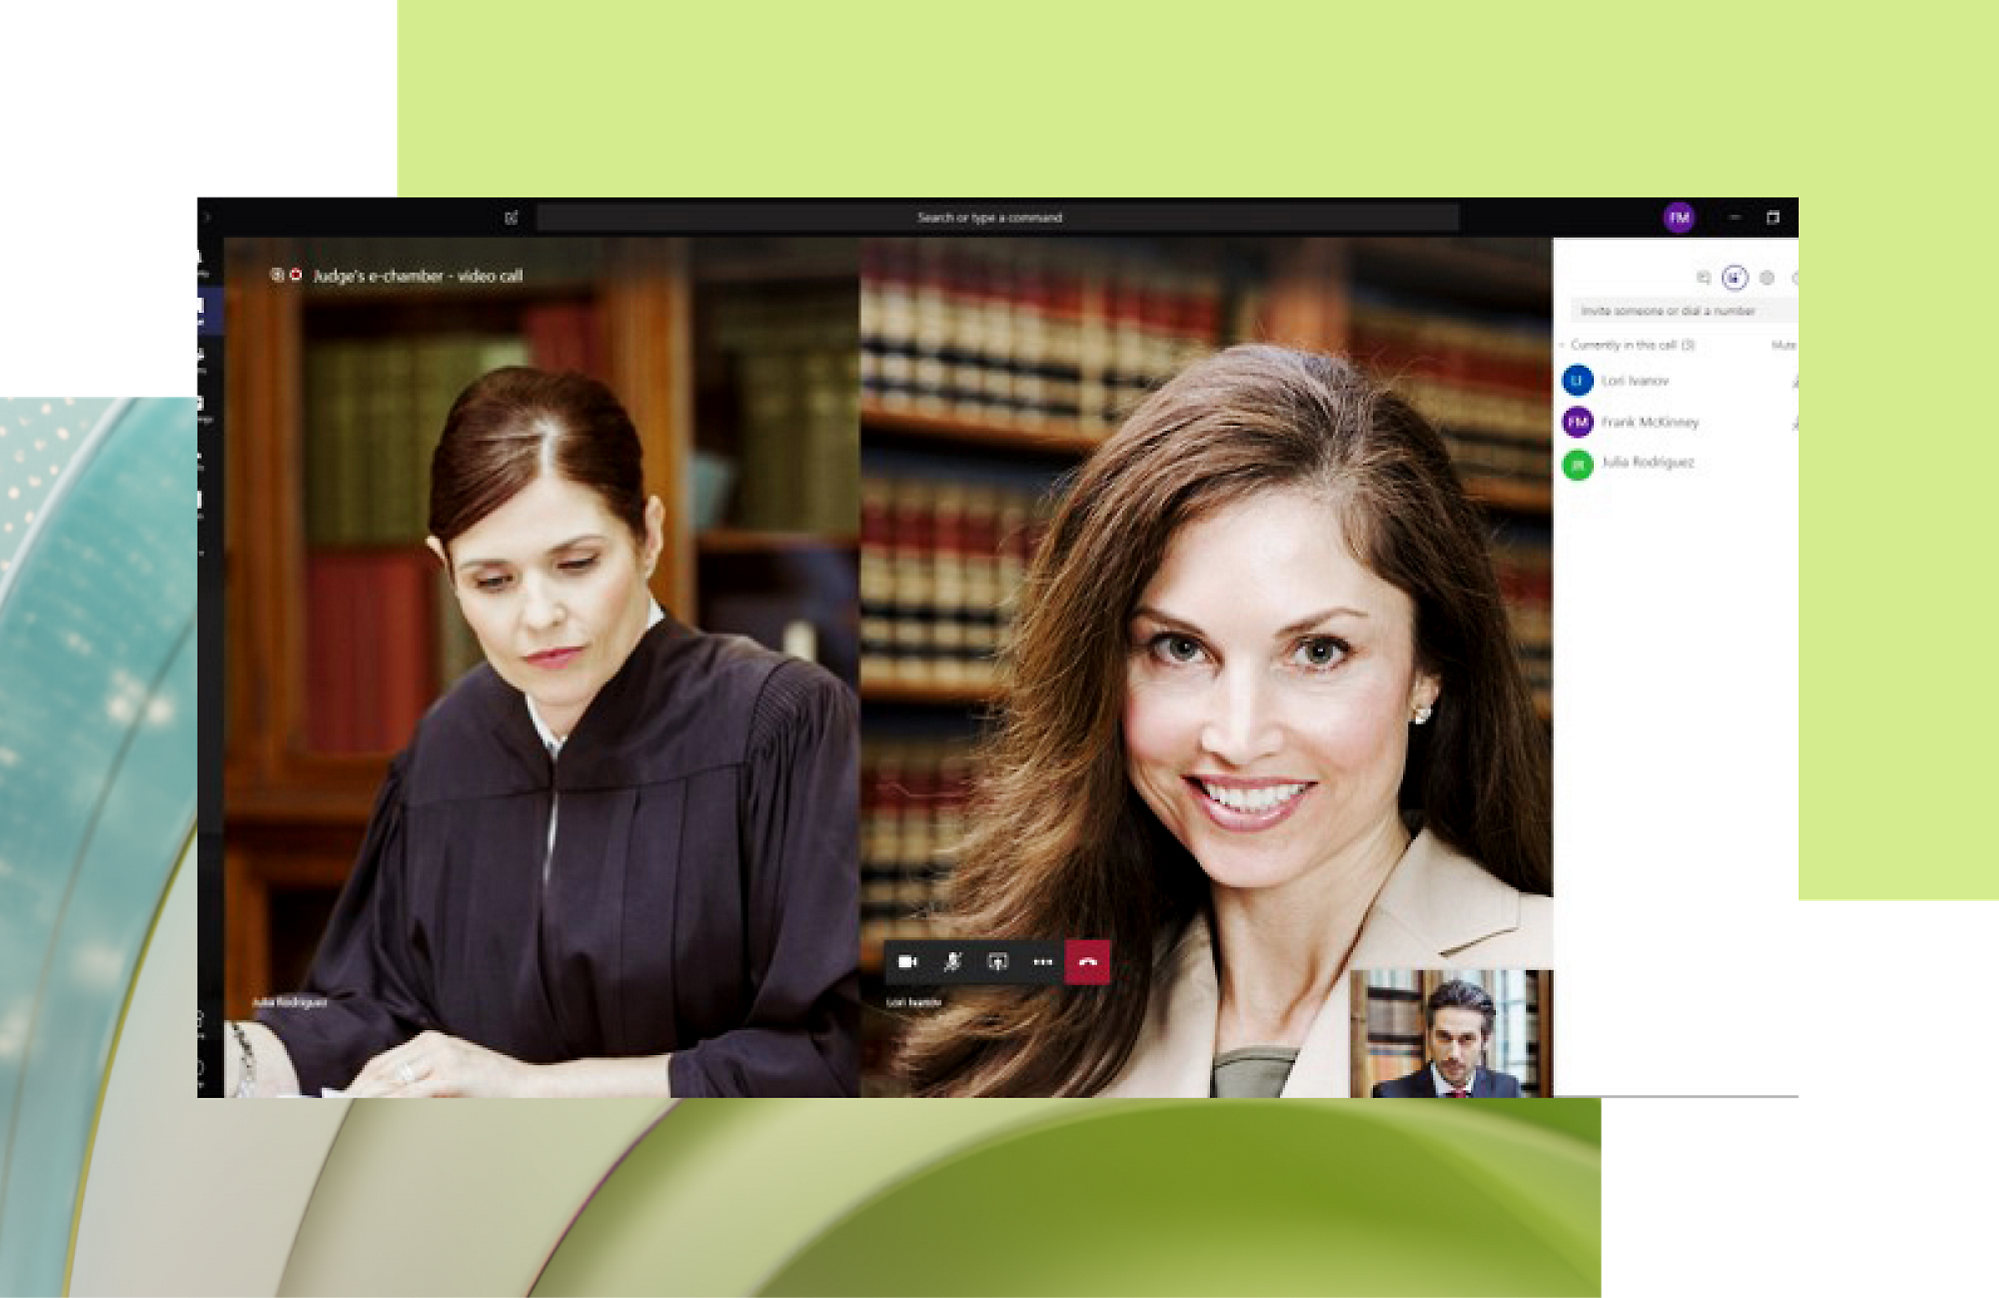 A woman in a judge's robe looks at a document, overlaid with a video call interface showing a smiling woman and a man 